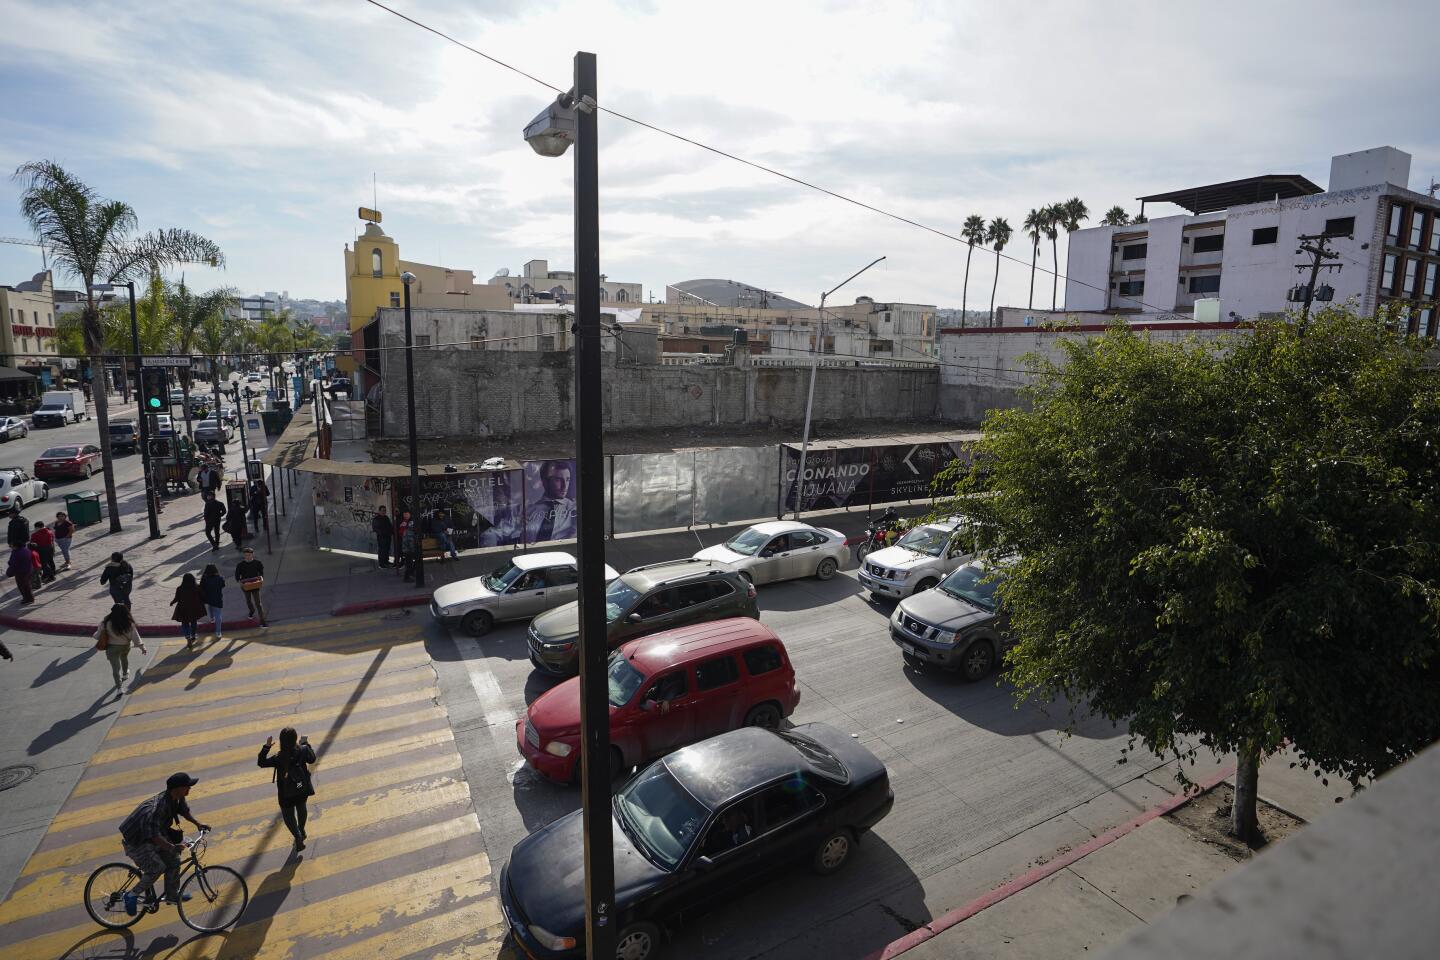 Cosmopolitan Group, Tijuana's largest builder, is constructing a wild looking 25-story mixed-use building on the city's Av. Revolucion, close to the famous Caesar's restaurant. The $40 million project looks like three offset large boxes stacked on top of